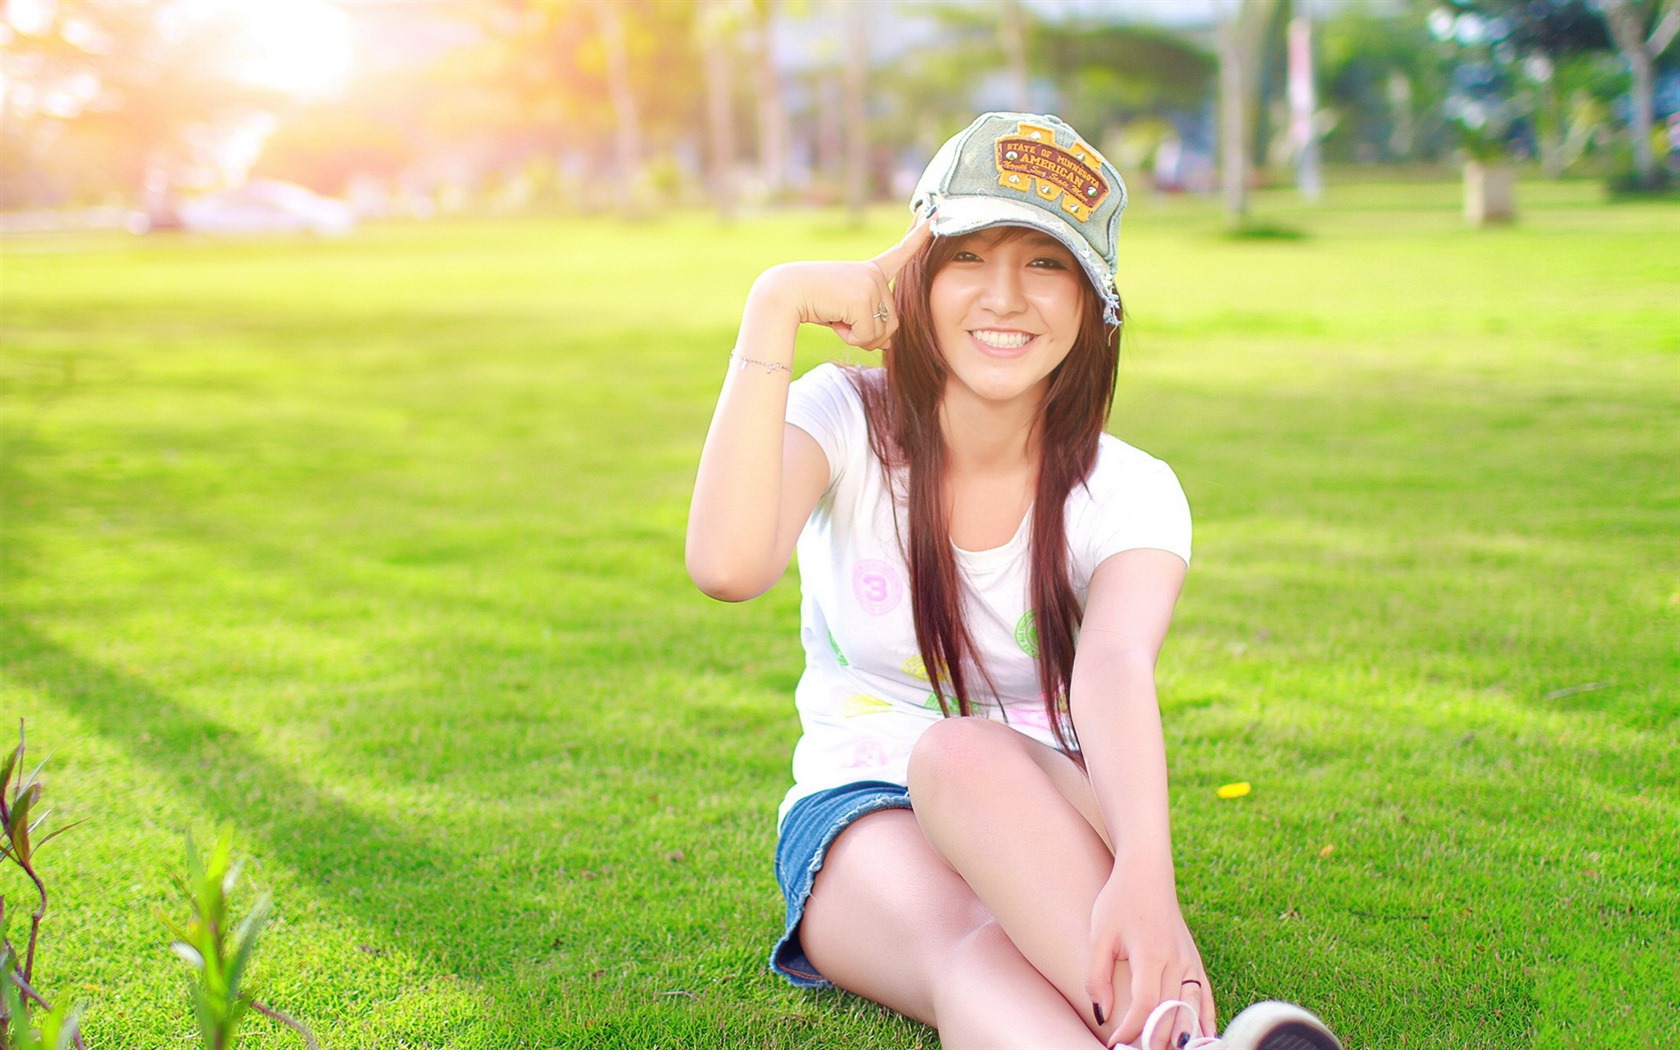 Pure and lovely young Asian girl HD wallpapers collection (5) #36 - 1680x1050